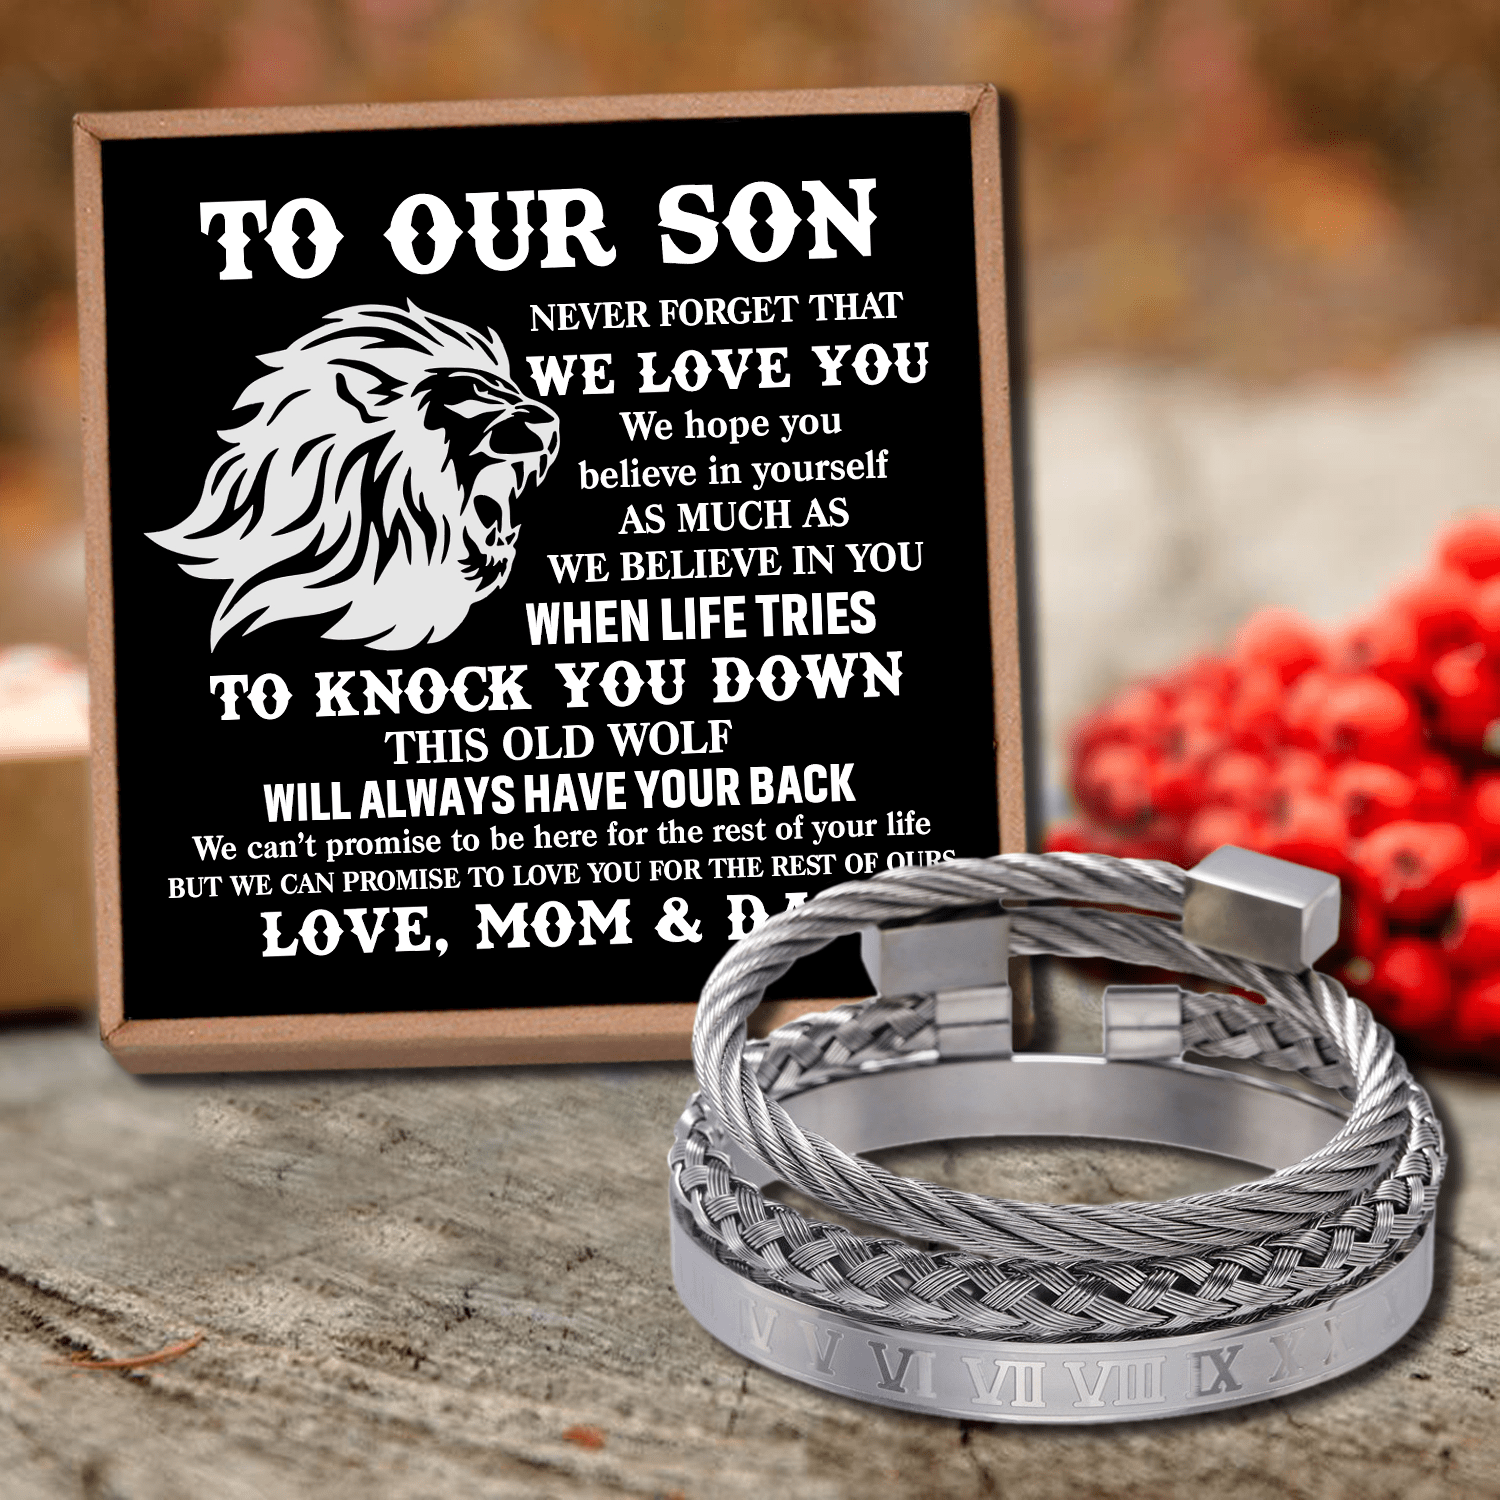 Bracelets To Our Son - Always Have Your Back Roman Numeral Bangle Weave Bracelets Set GiveMe-Gifts